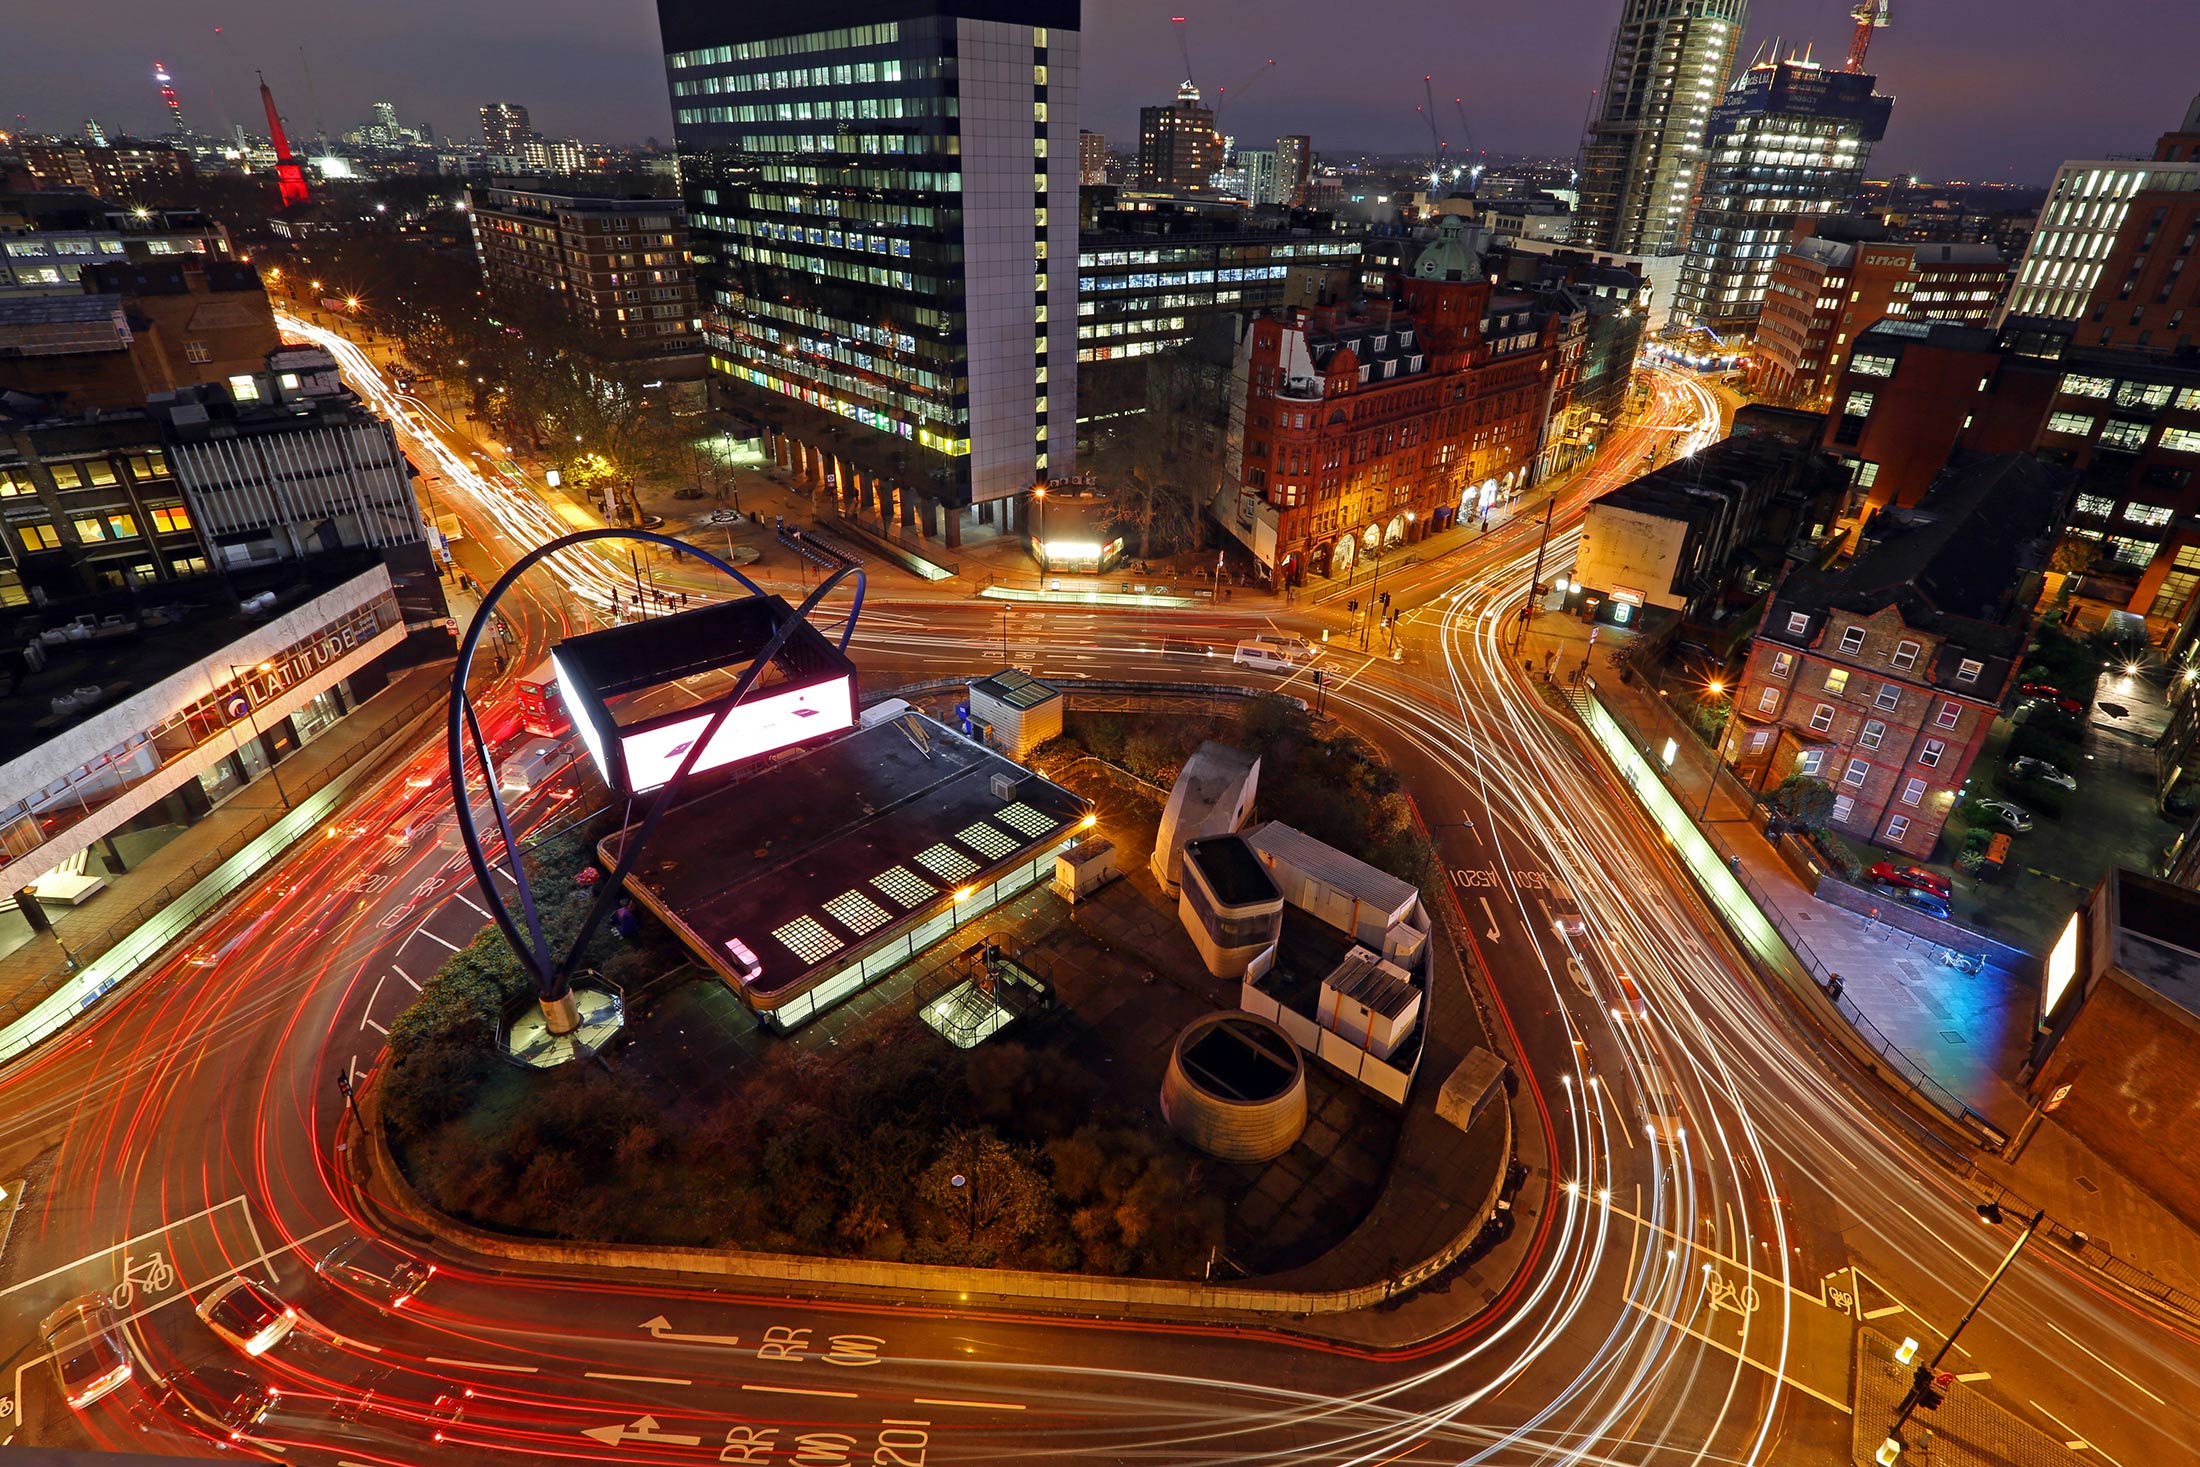 Light trails from traffic are seen at the Old Street roundabout in the area known as London’s Tech City on Dec. 17, 2013. 
